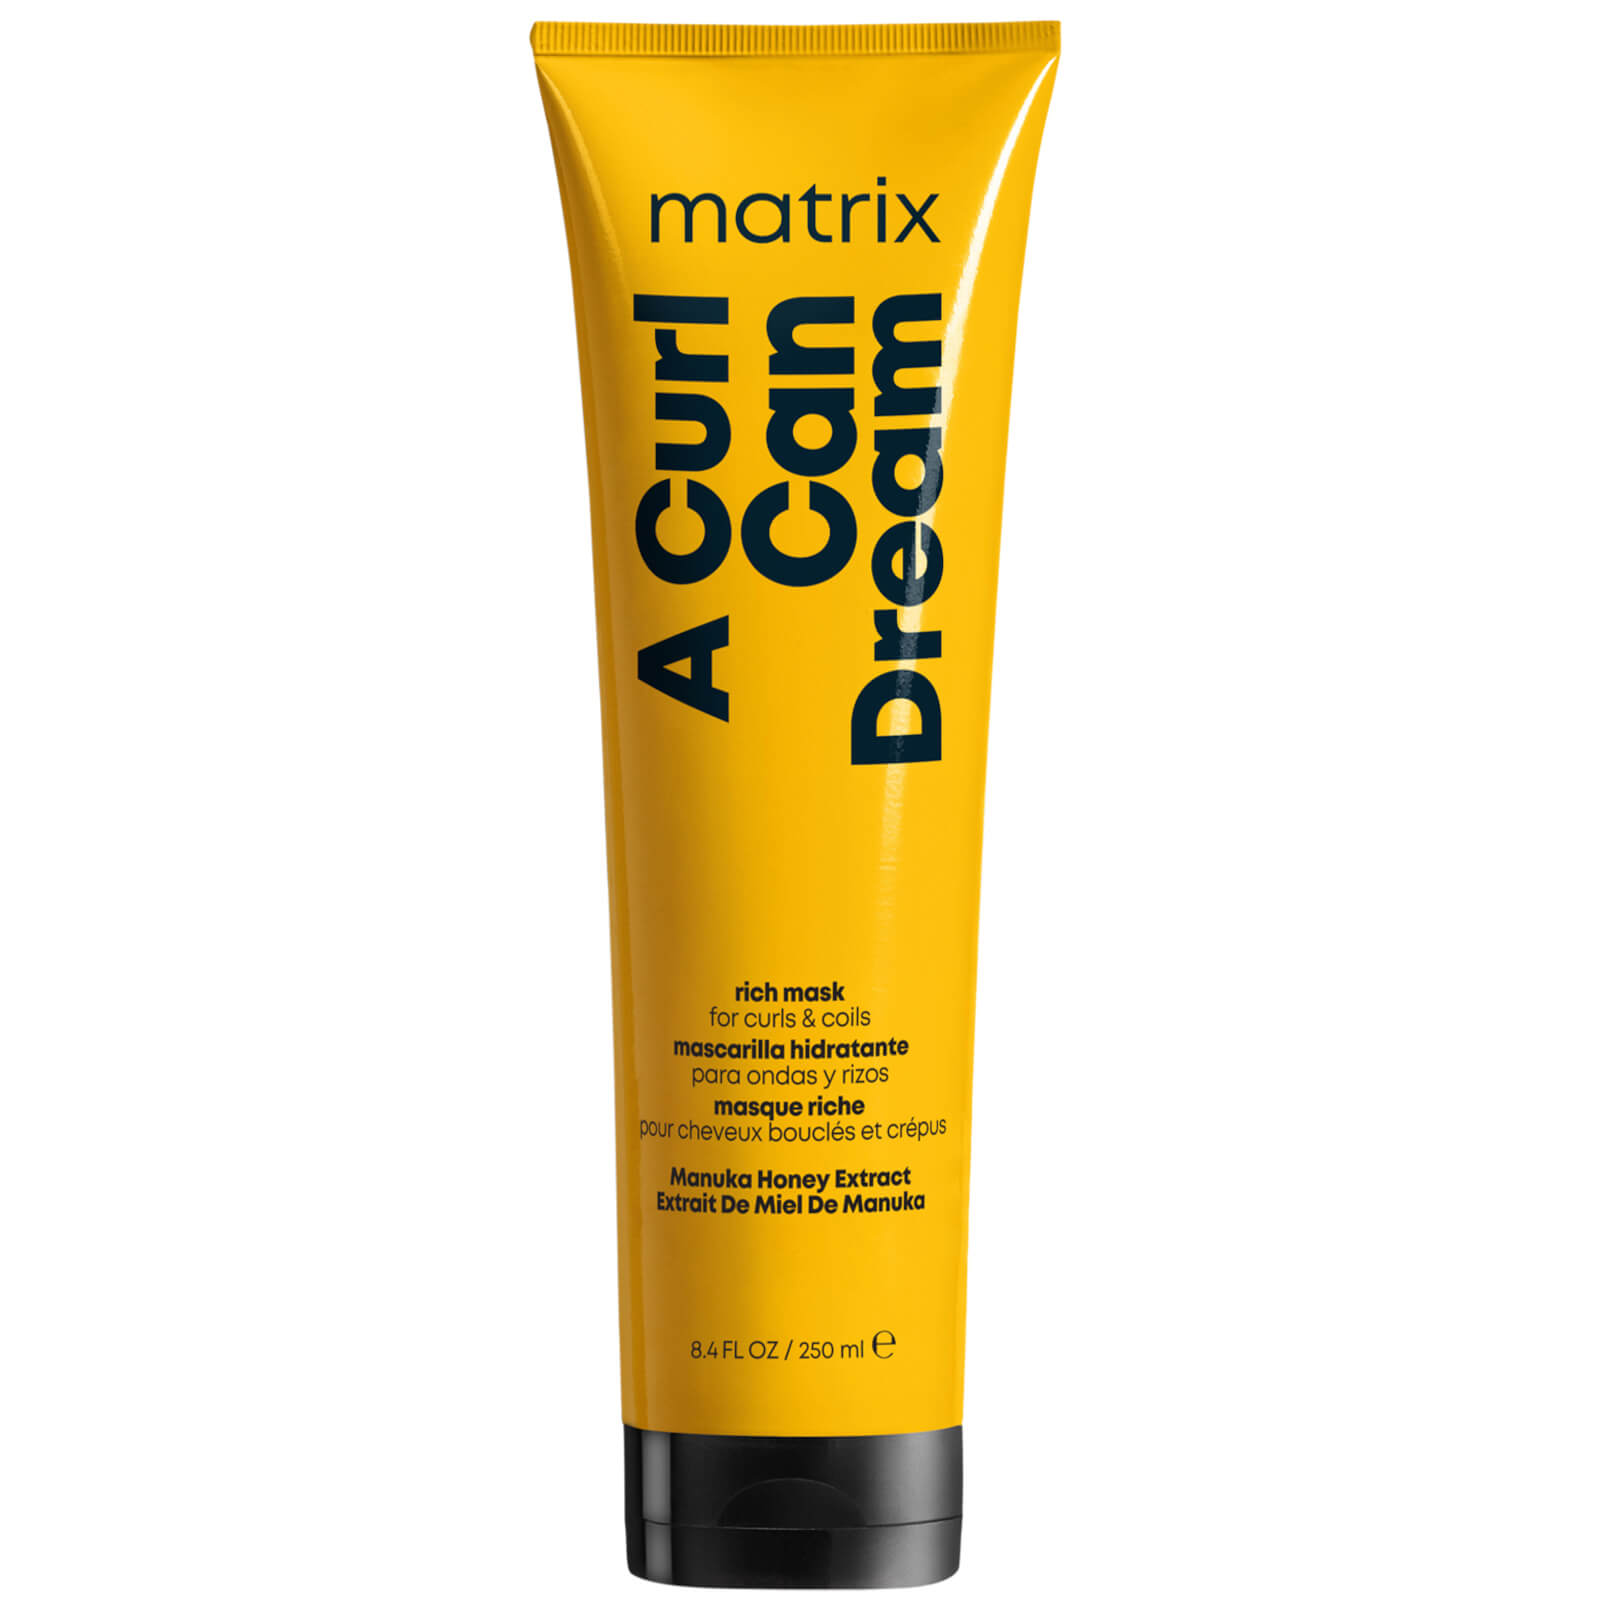 Photos - Facial Mask Matrix A Curl Can Dream Rich Hydrating Hair Mask for Curls and Coils 250ml 